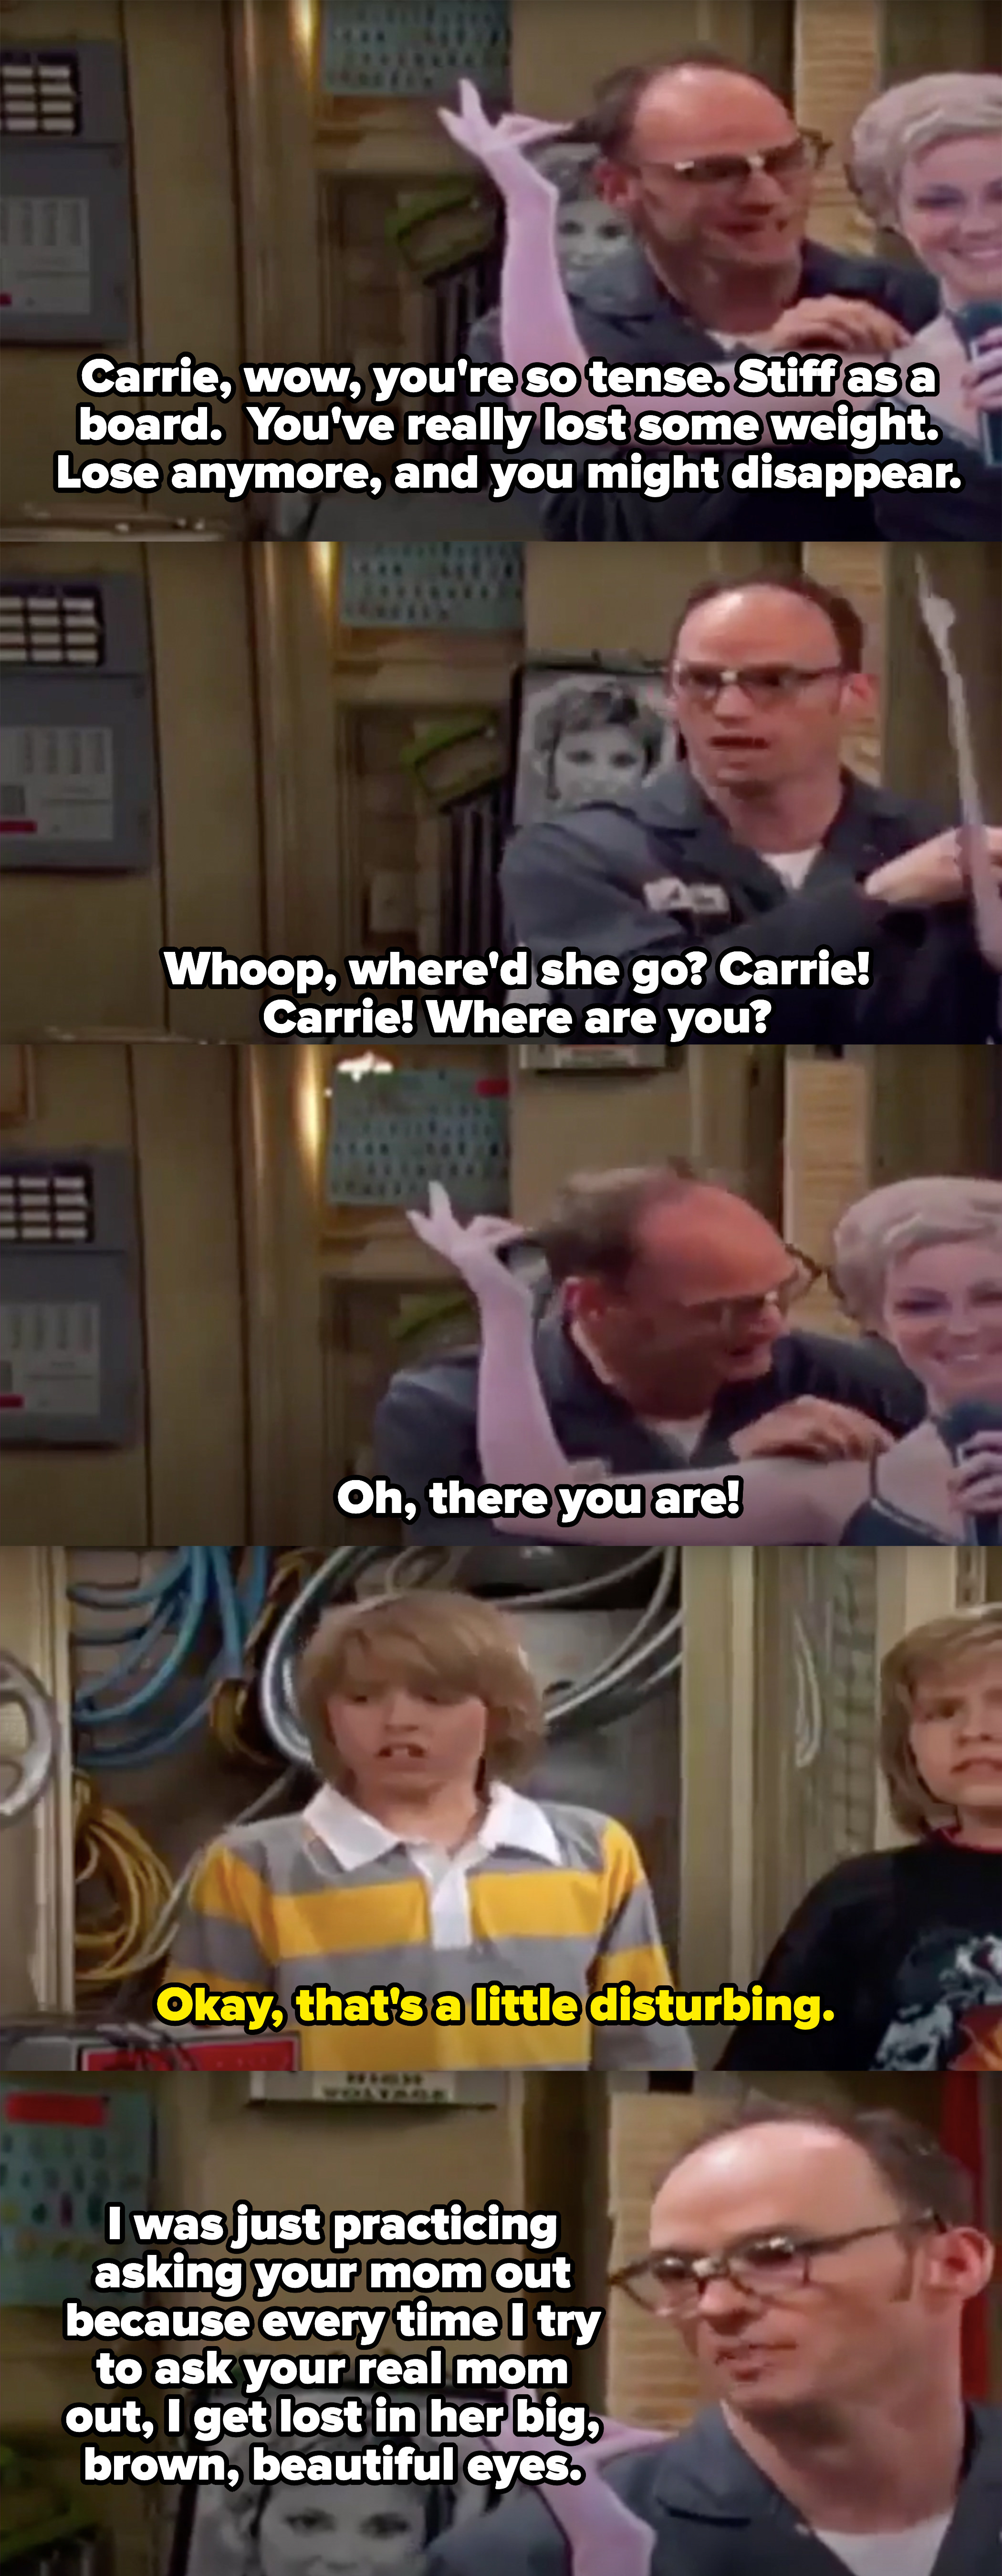 Arwin making bad jokes to a cardboard cutout, then saying he&#x27;s practicing asking her out because when he tries to ask the really Carrie, he gets lost in her eyes